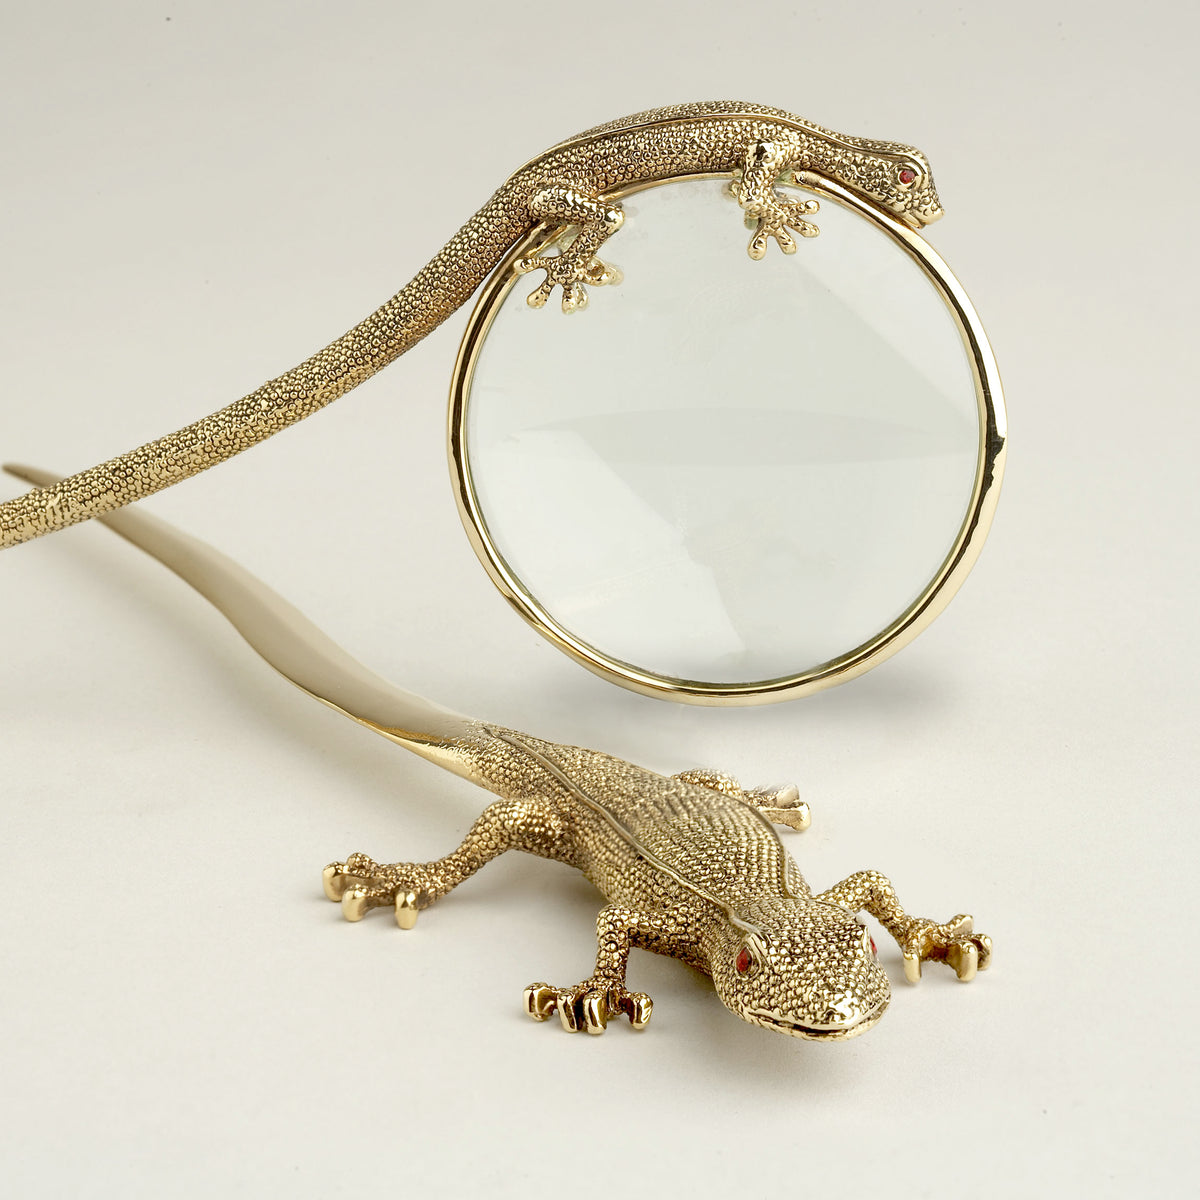 Gecko Magnifying Glass